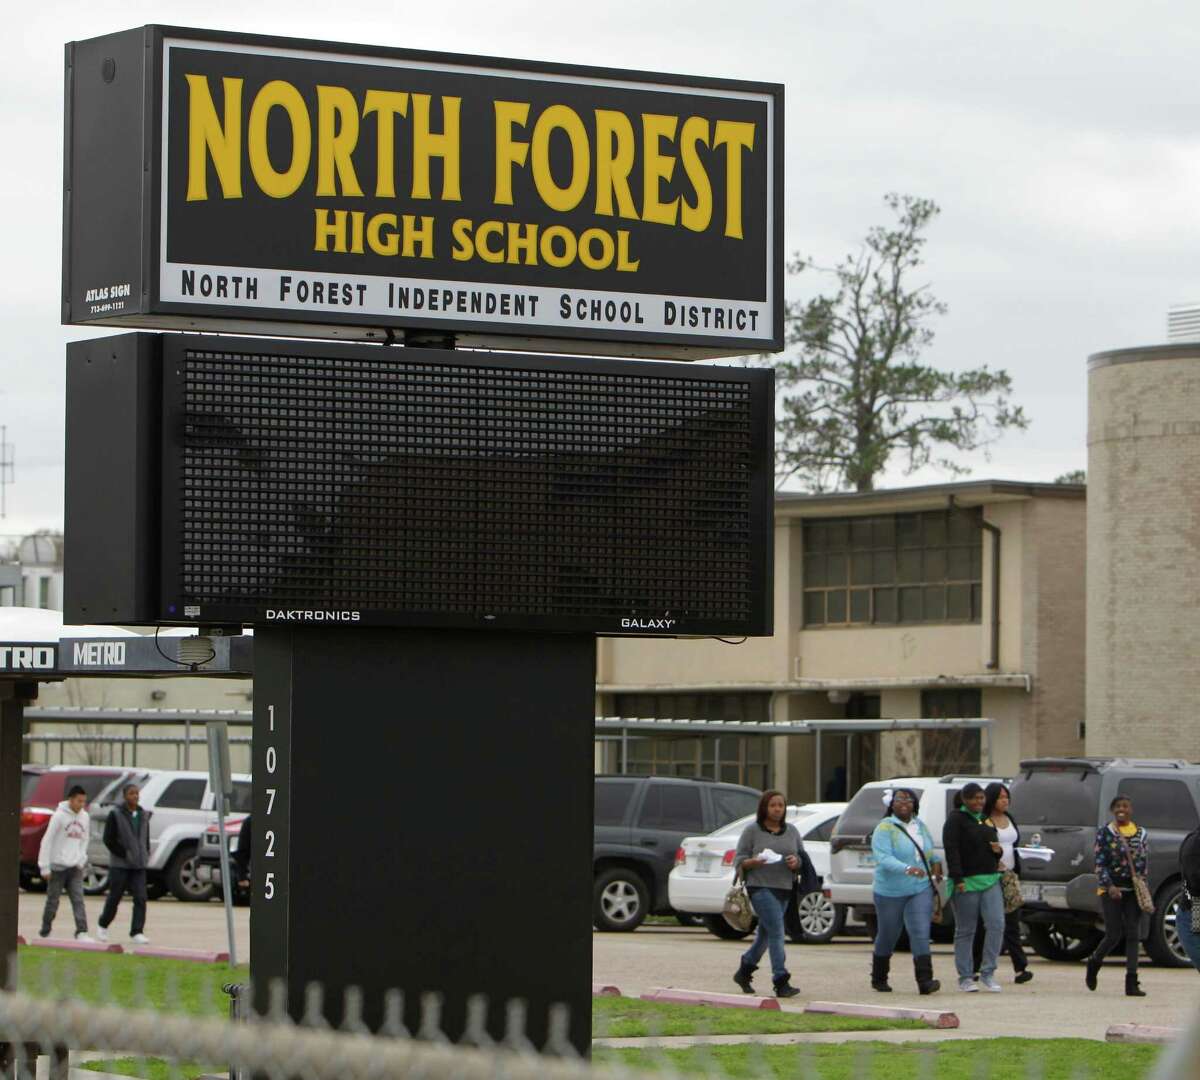 HISD is seeking more state funds to rebuild North Forest High School, shown here during a shooting investigation in 2012. HISD annexed the North Forest school district 14 months ago. ( Melissa Phillip / Houston Chronicle )